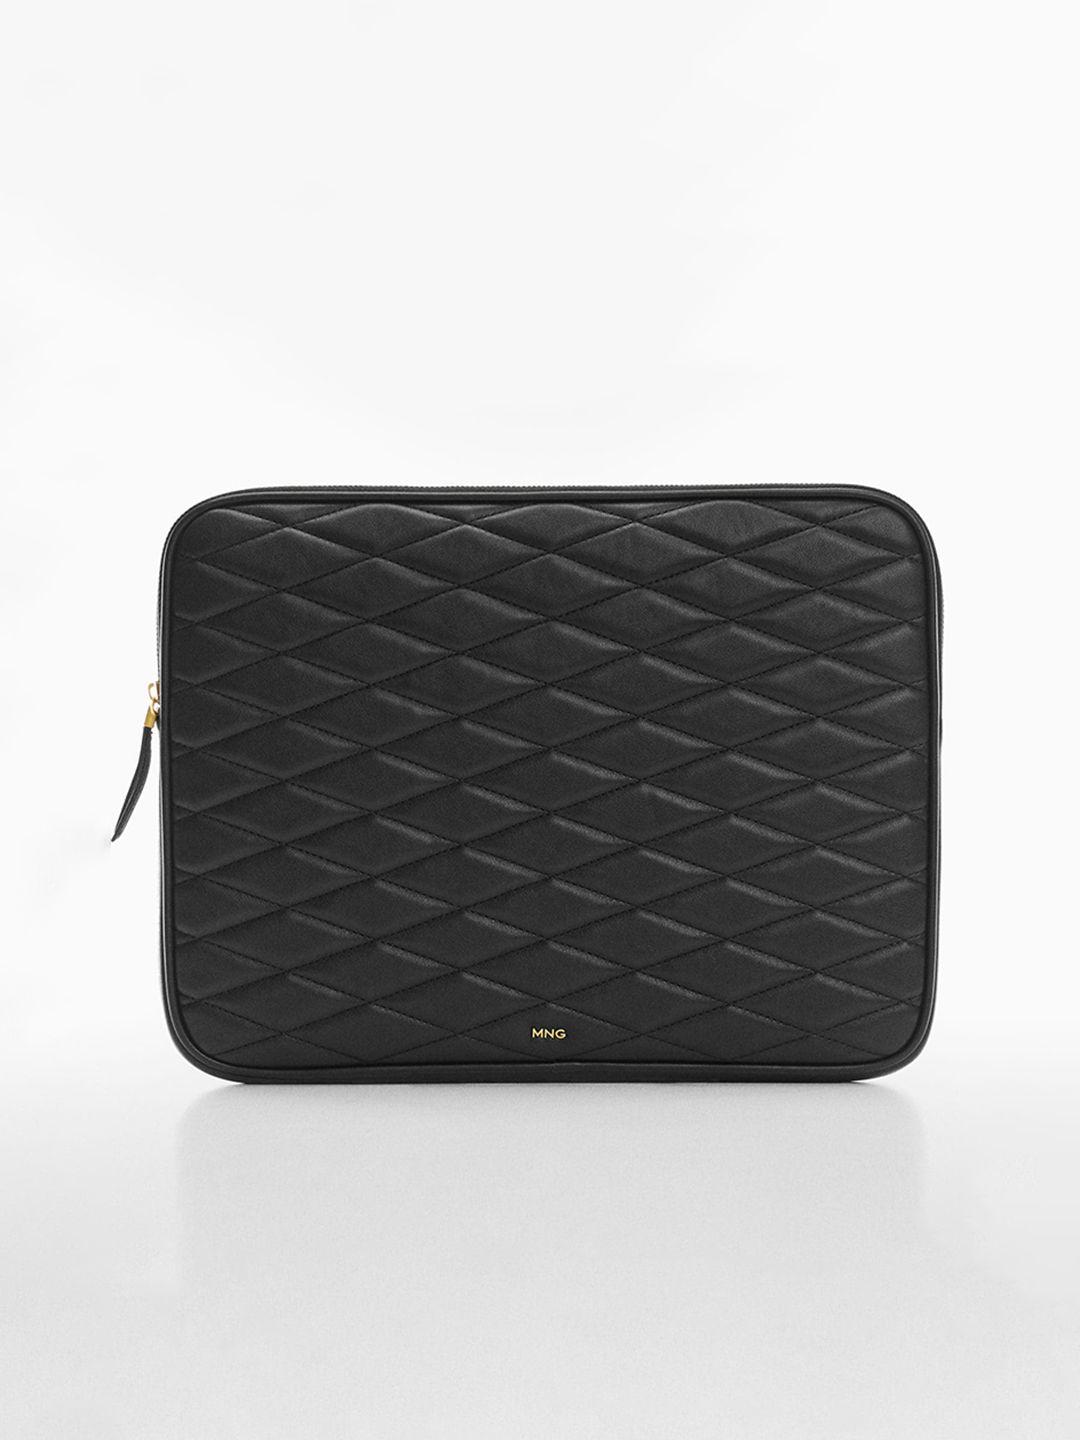 mango women quilted 15 inch laptop sleeve